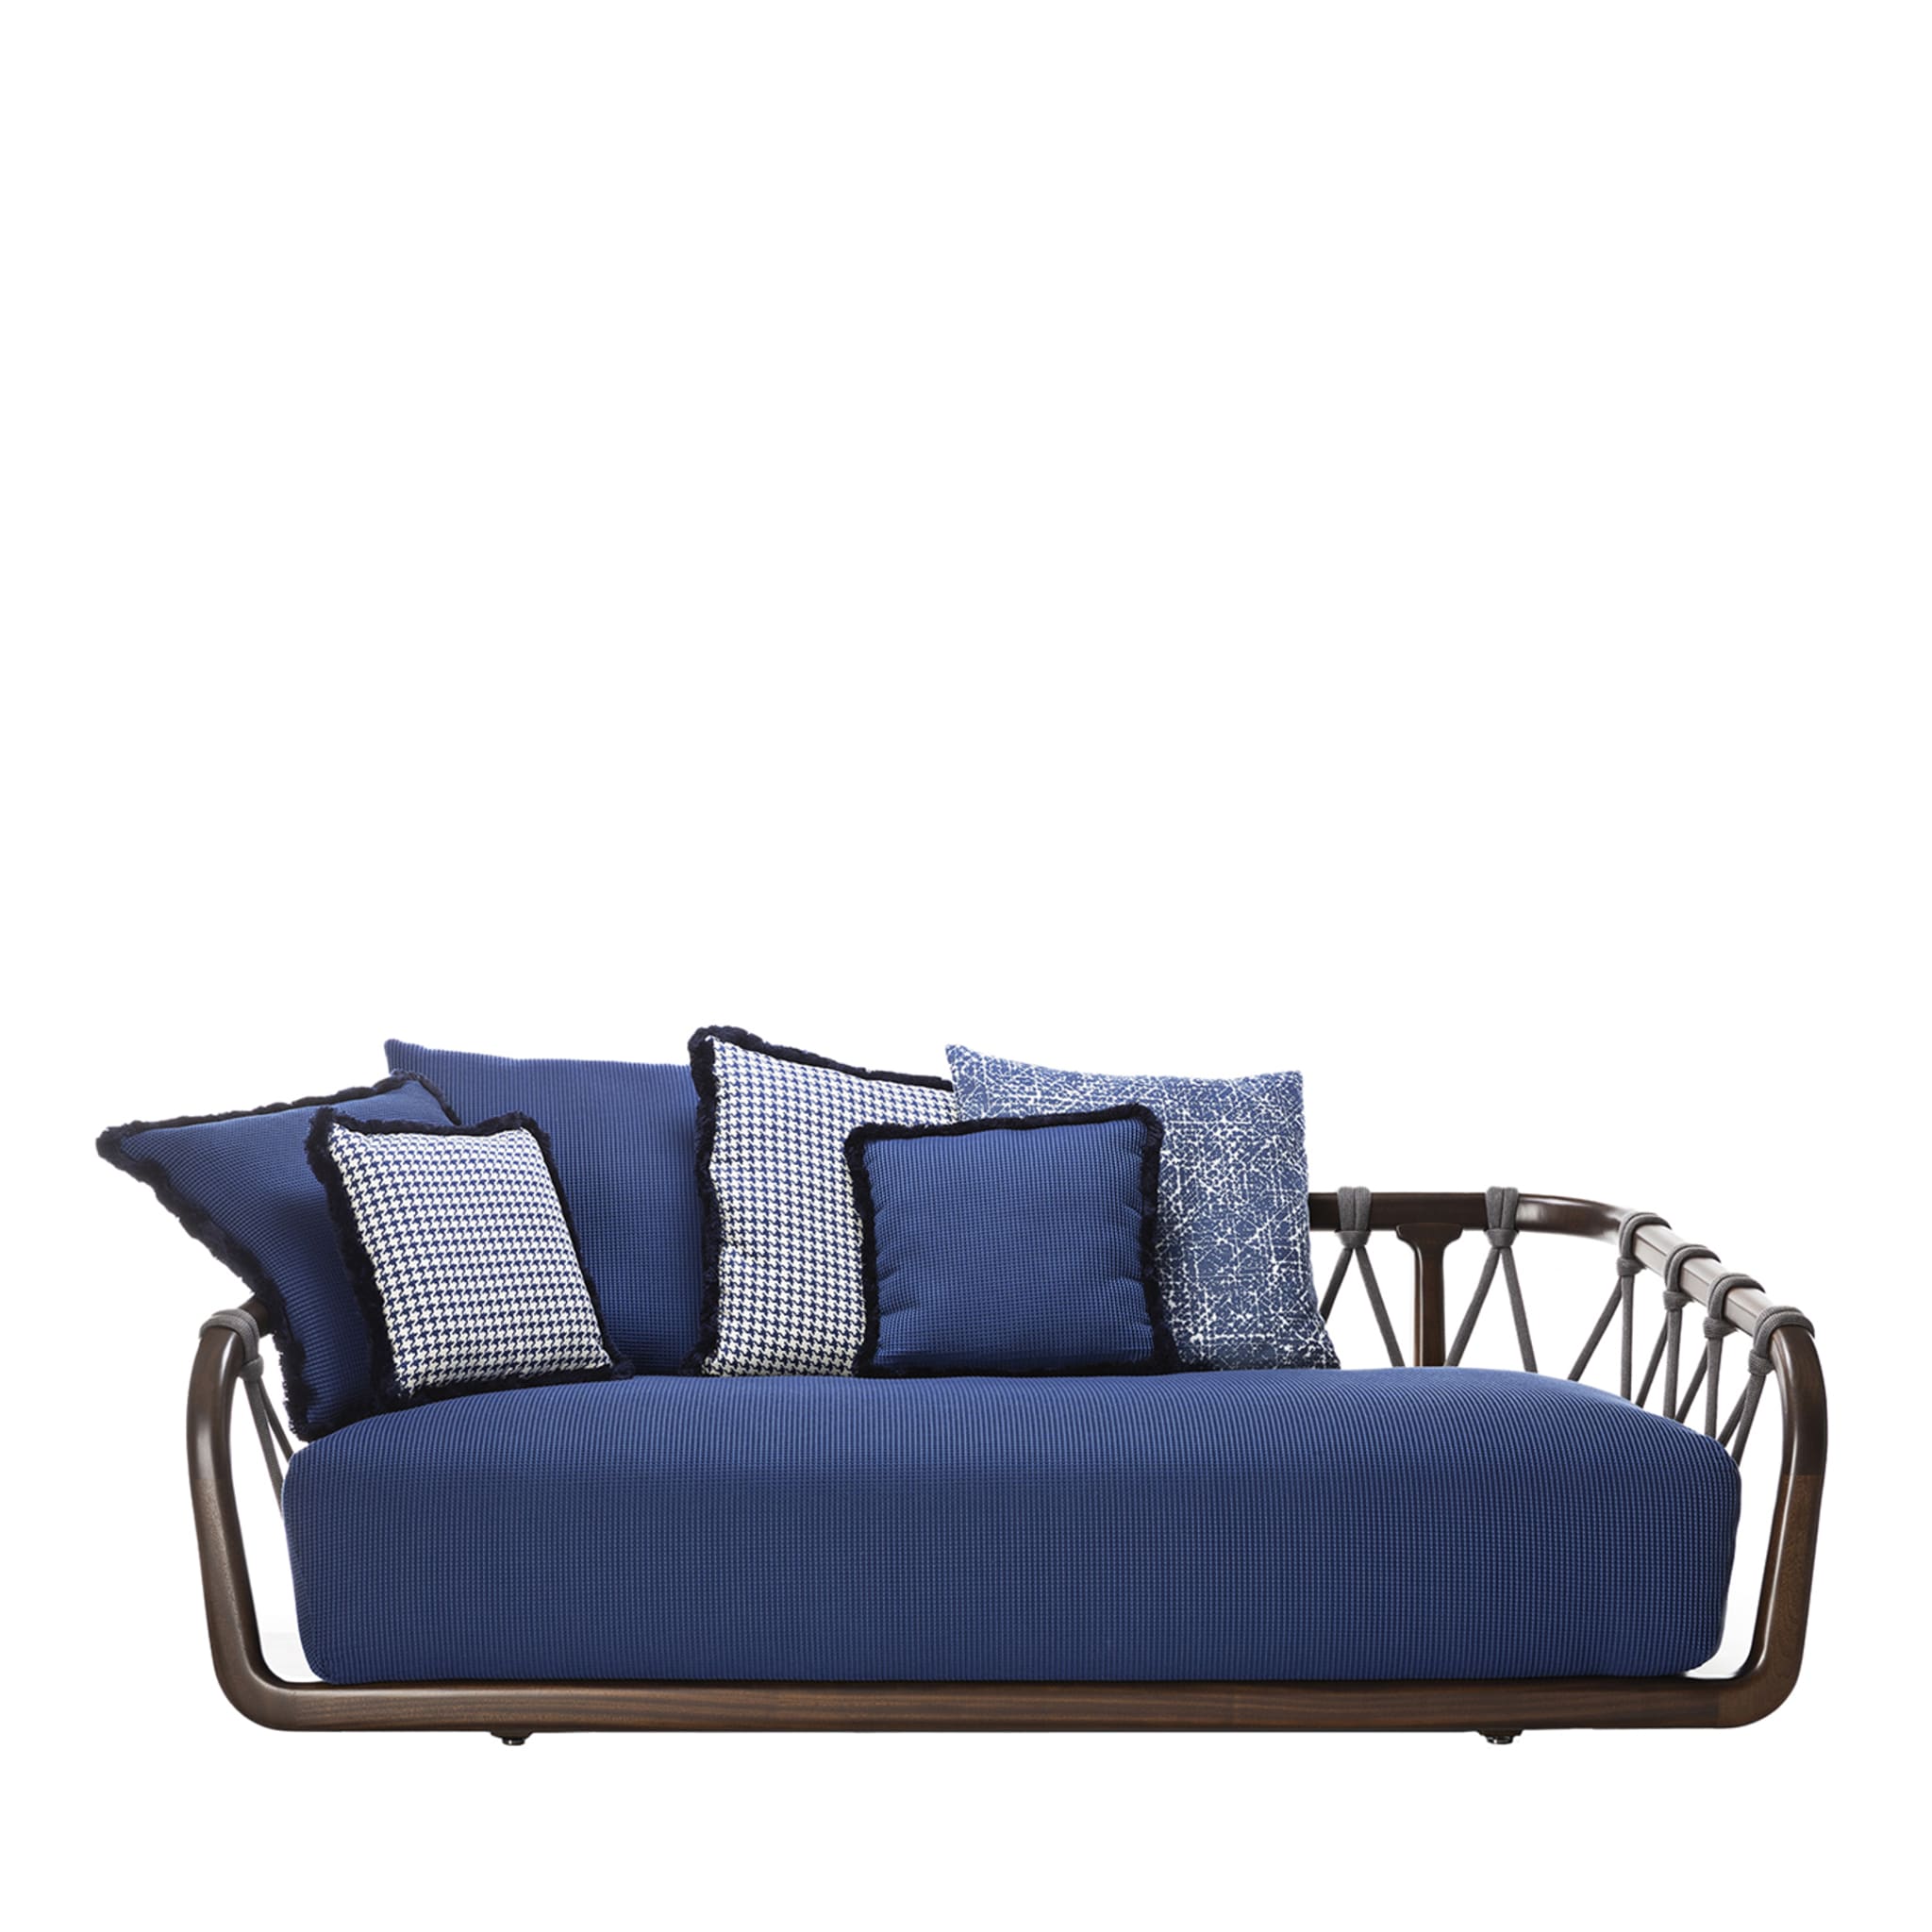 Sunset Basket Sofa 215 by Paola Navone - Main view